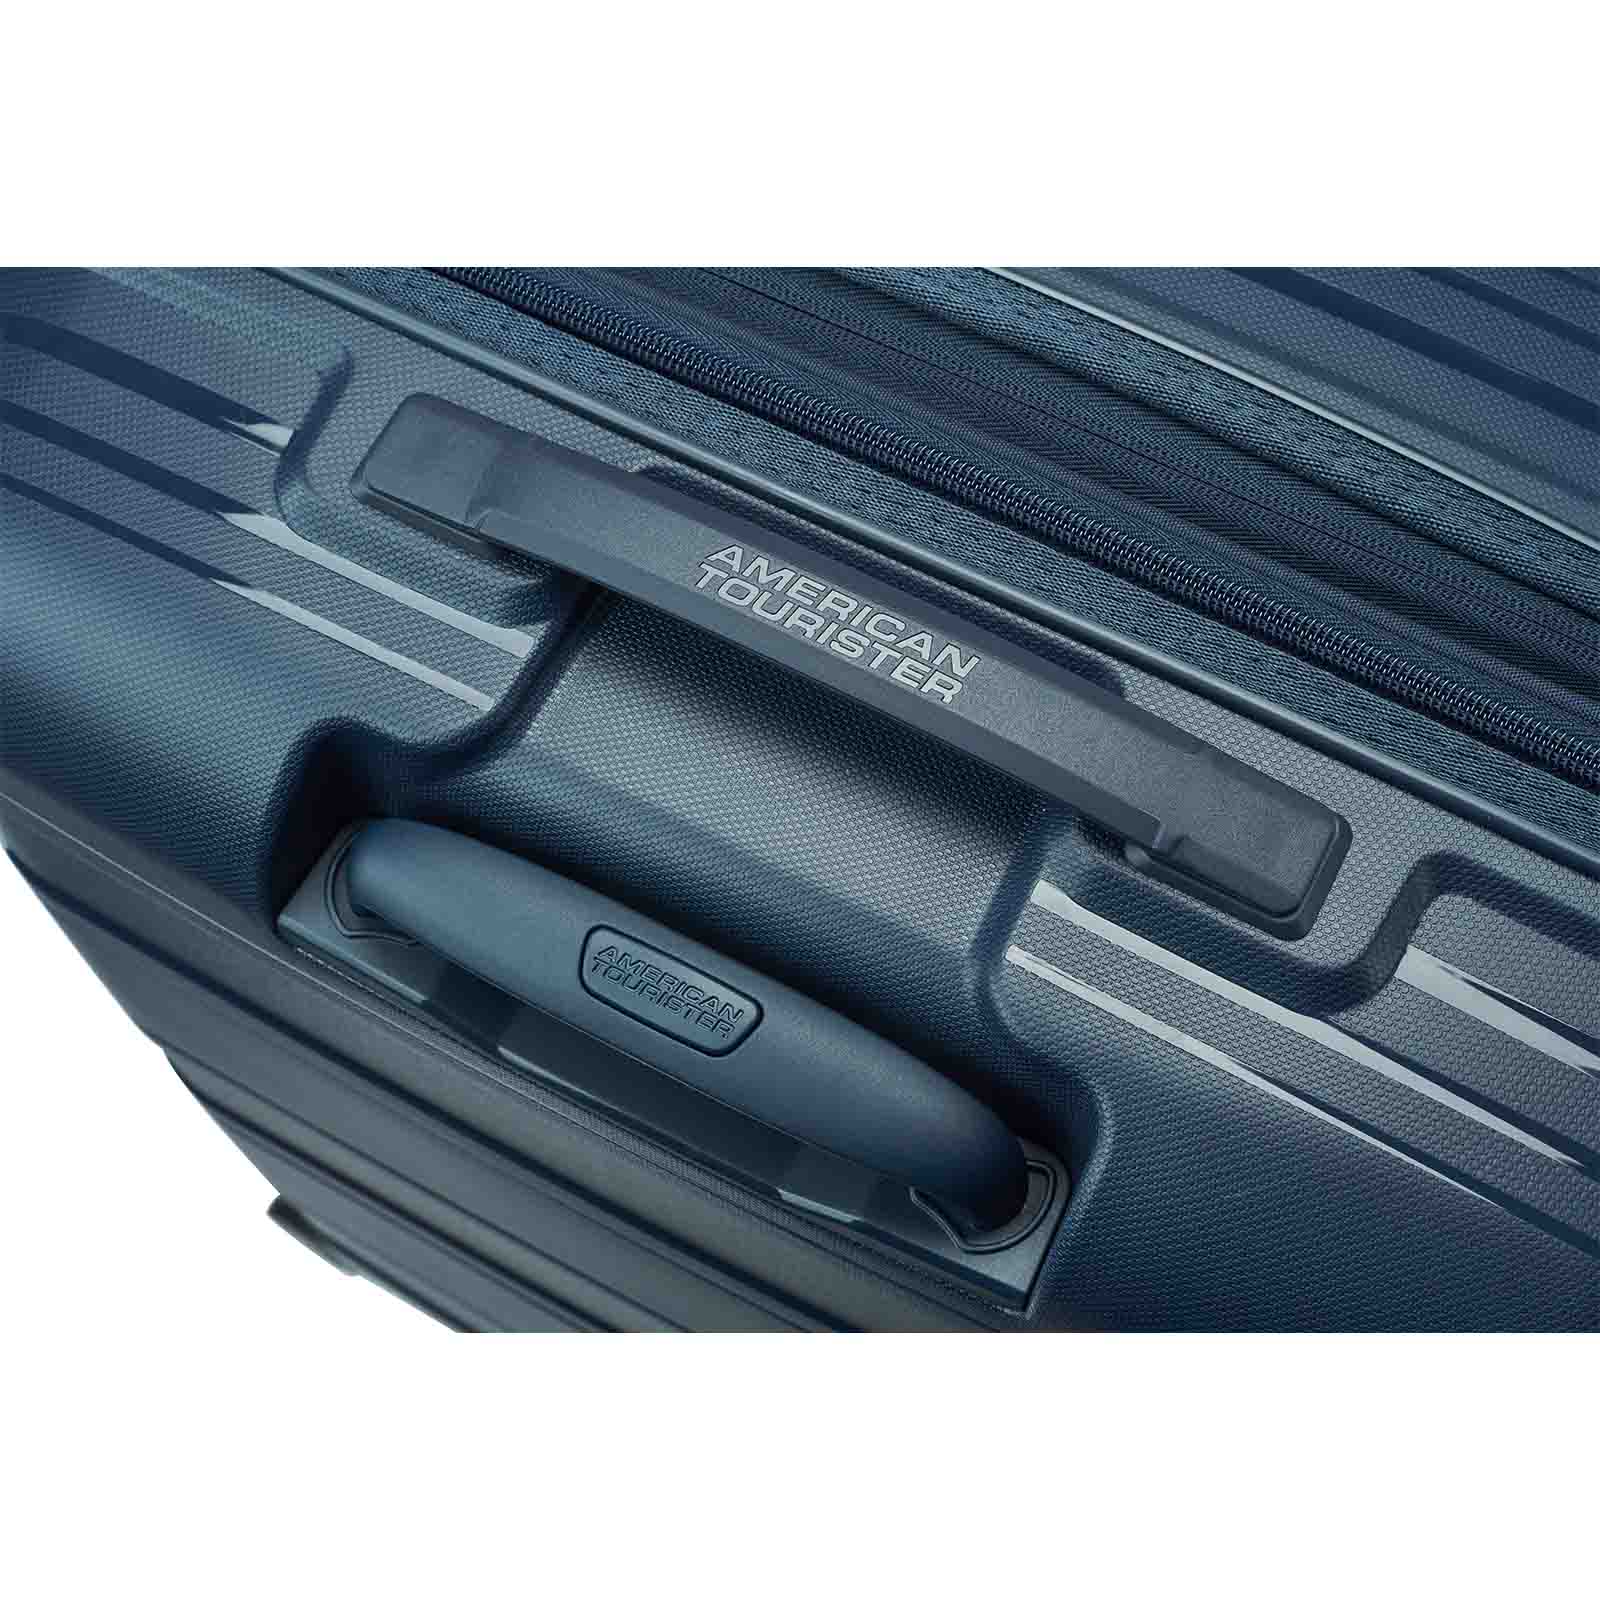 American-Tourister-Light-Max-82cm-Suitcase-Navy-Trolley